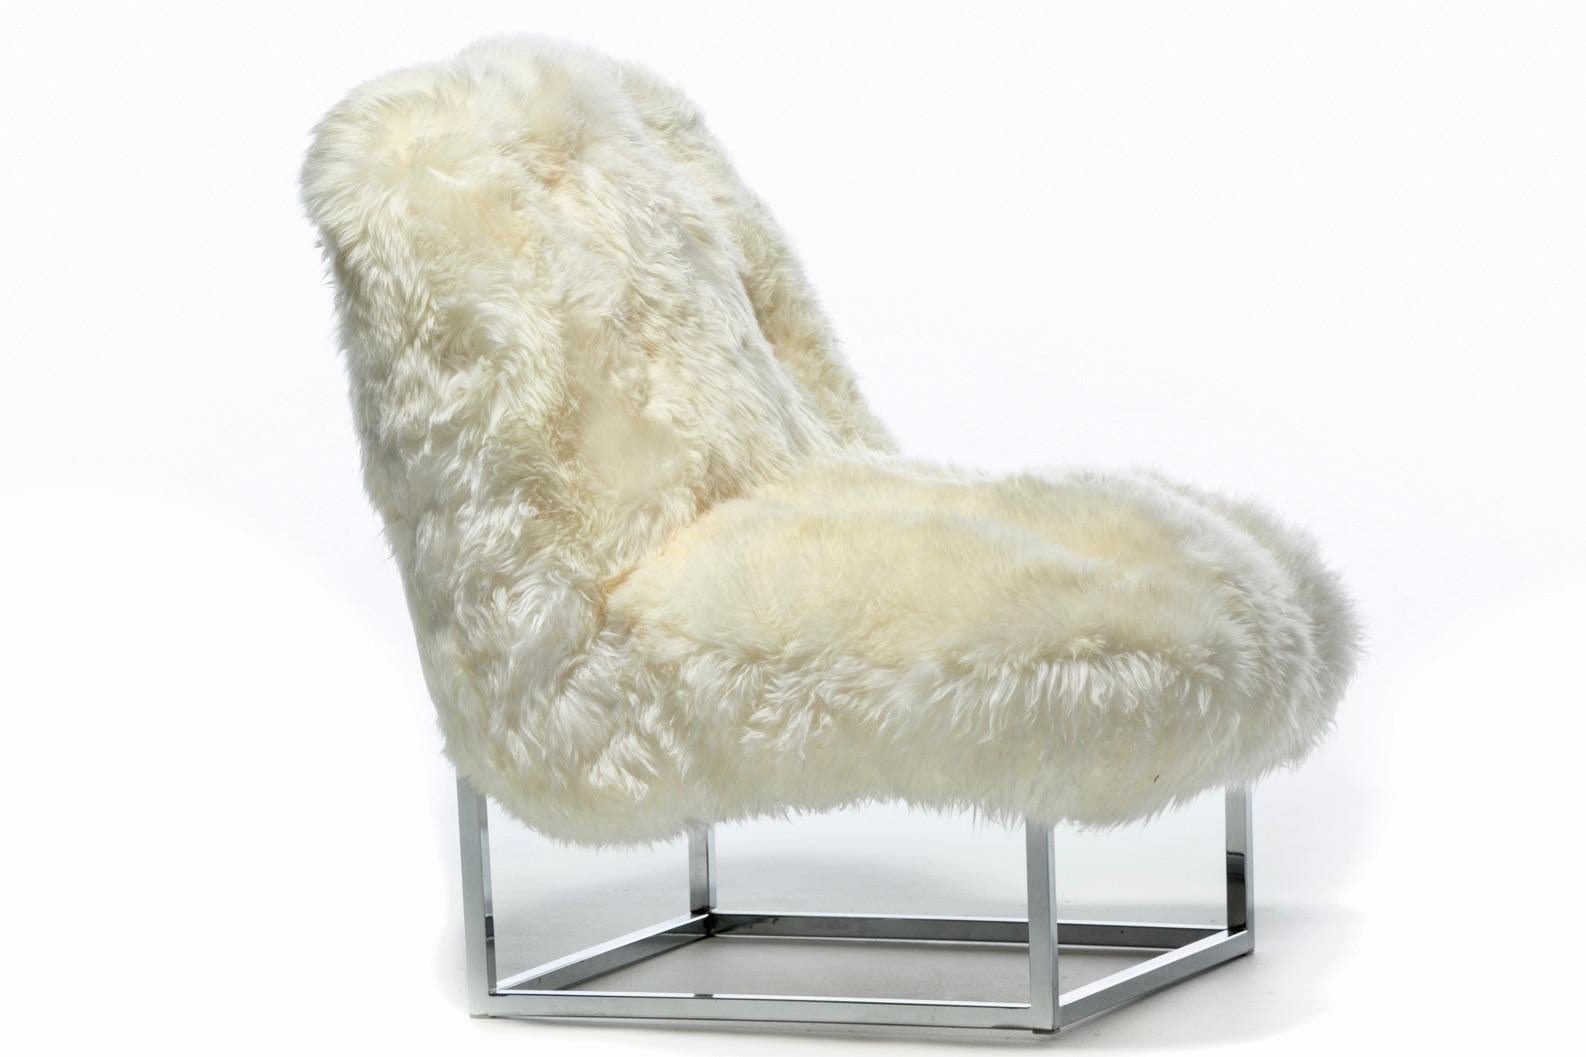 Pair of Milo Baughman Style Sheepskin & Chrome Slipper Chairs c. 1970s In Good Condition For Sale In Saint Louis, MO